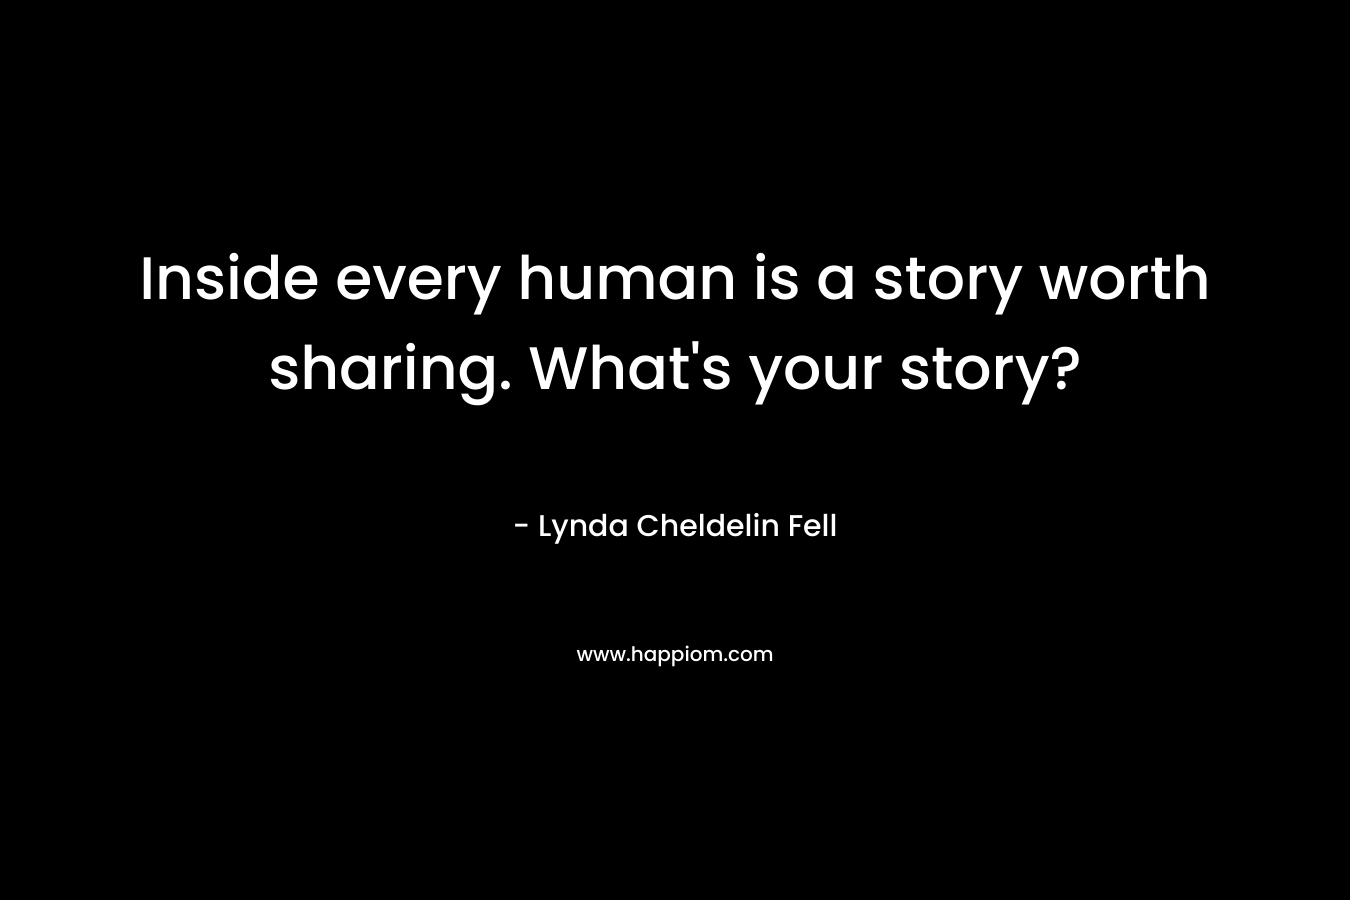 Inside every human is a story worth sharing. What’s your story? – Lynda Cheldelin Fell